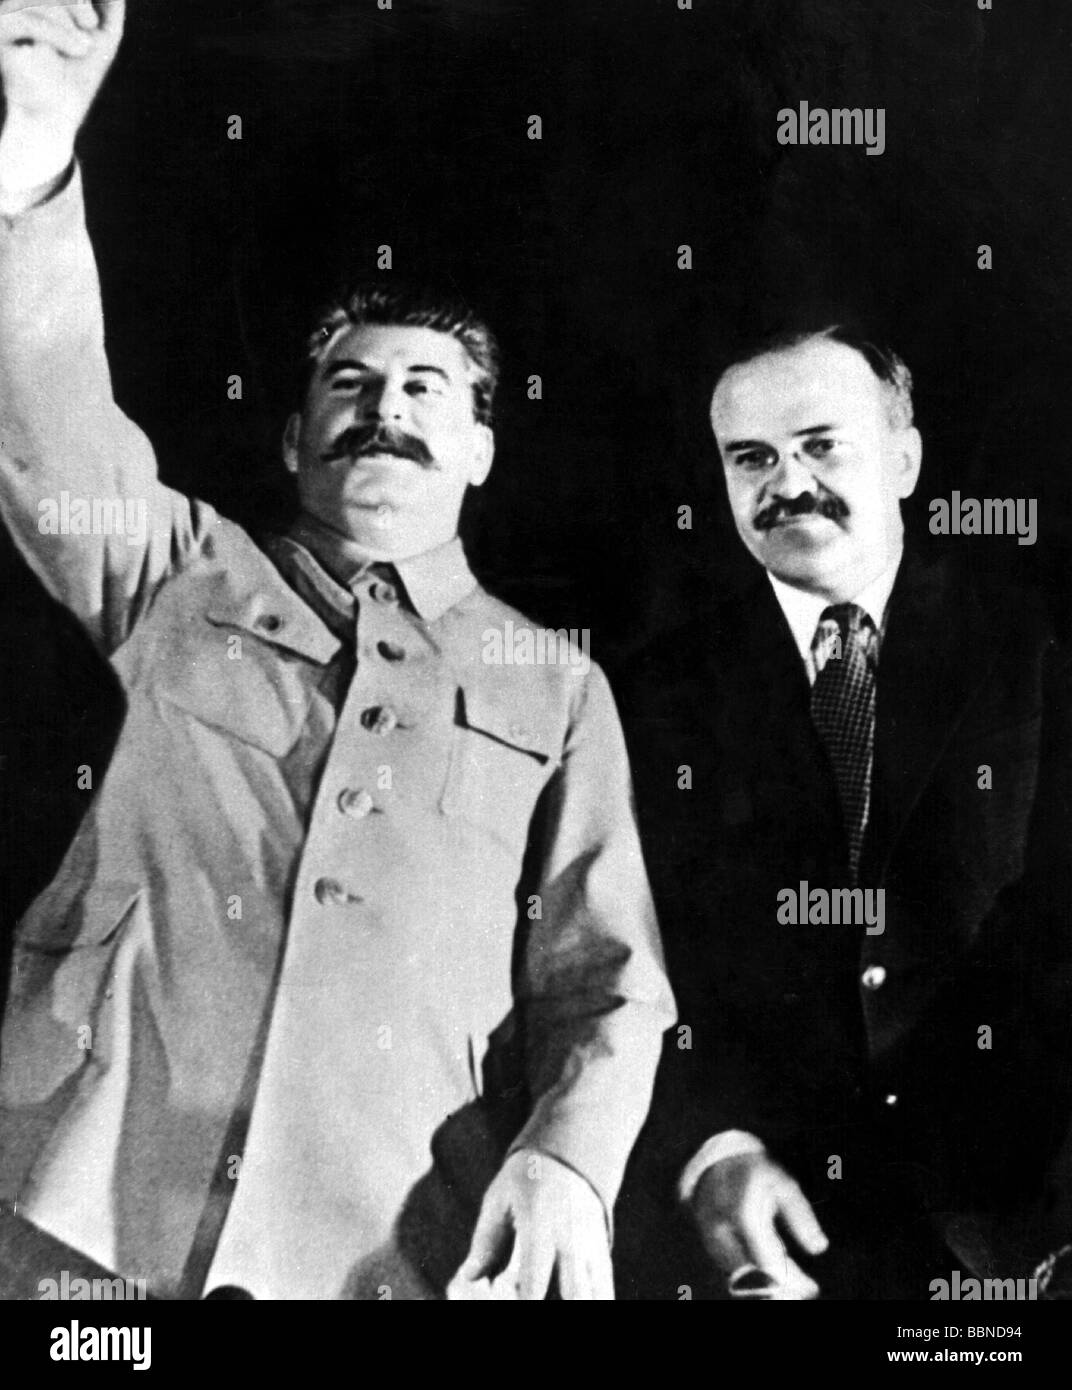 Stalin, Joseph Vissarionovich, 18.12.1879 - 5.3.1953, Soviet statesman, General Secretary of the Communist Party of the Soviet Union 1922 - 1953, with Vyacheslav Molotov, Chairman of the Council of People's Commissars, 1935, half length, Stock Photo